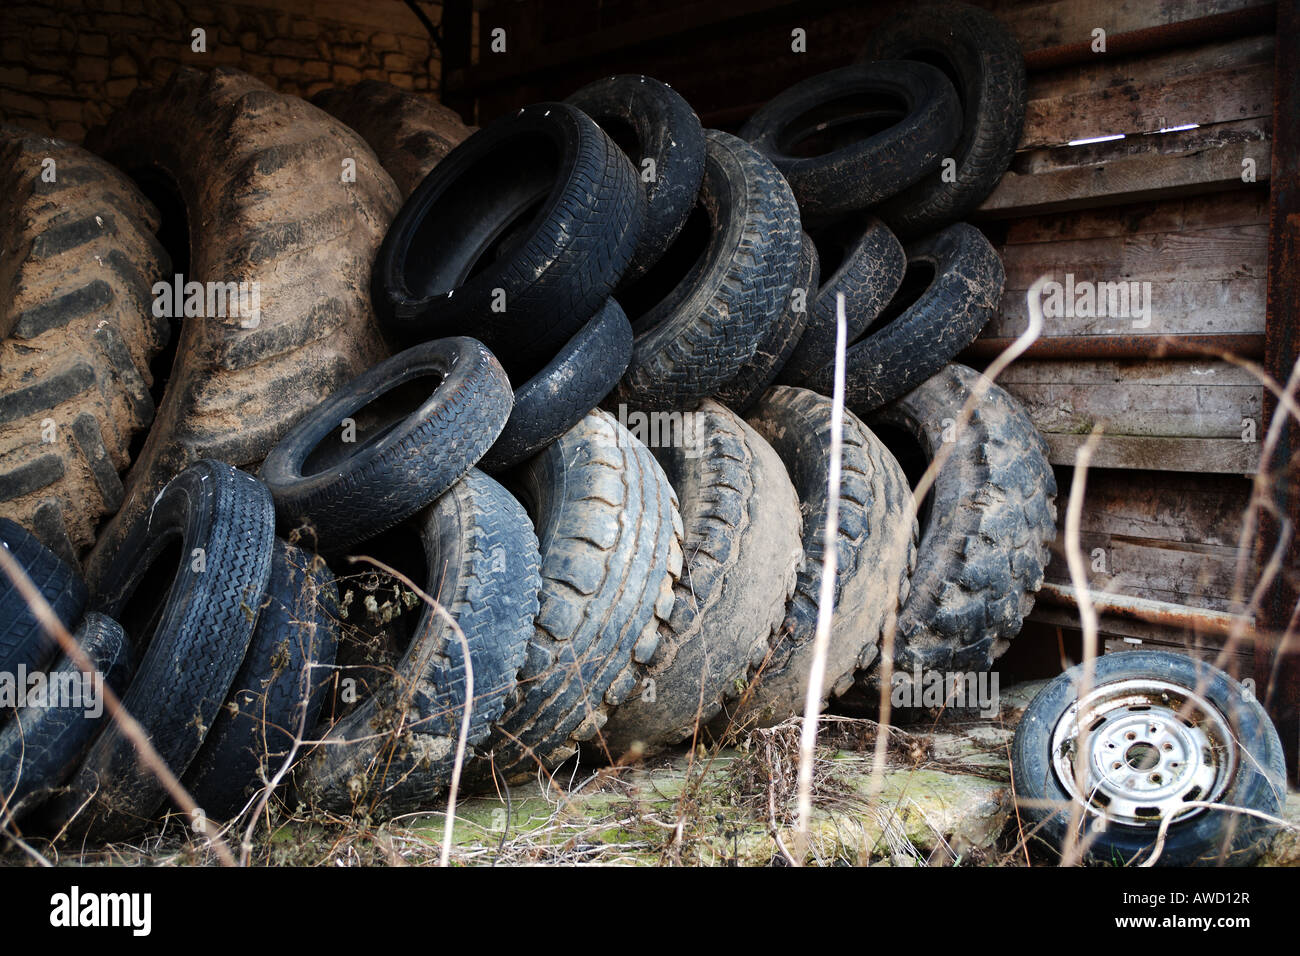 Piles of disused tyres/tires on a farm. Colour Stock Photo